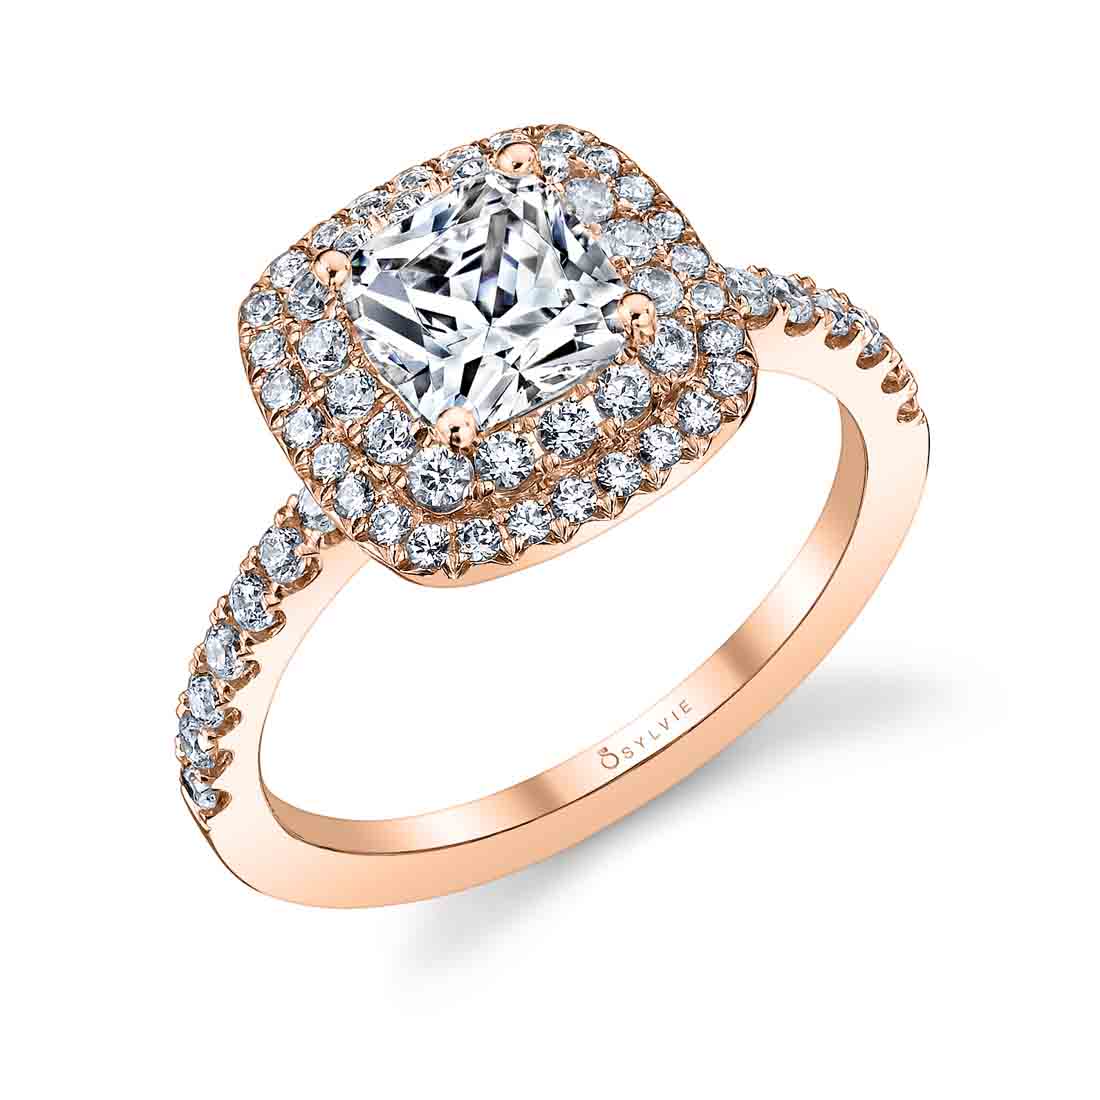 Claudia - Cushion Cut Engagement Ring with Double Halo in Rose Gold